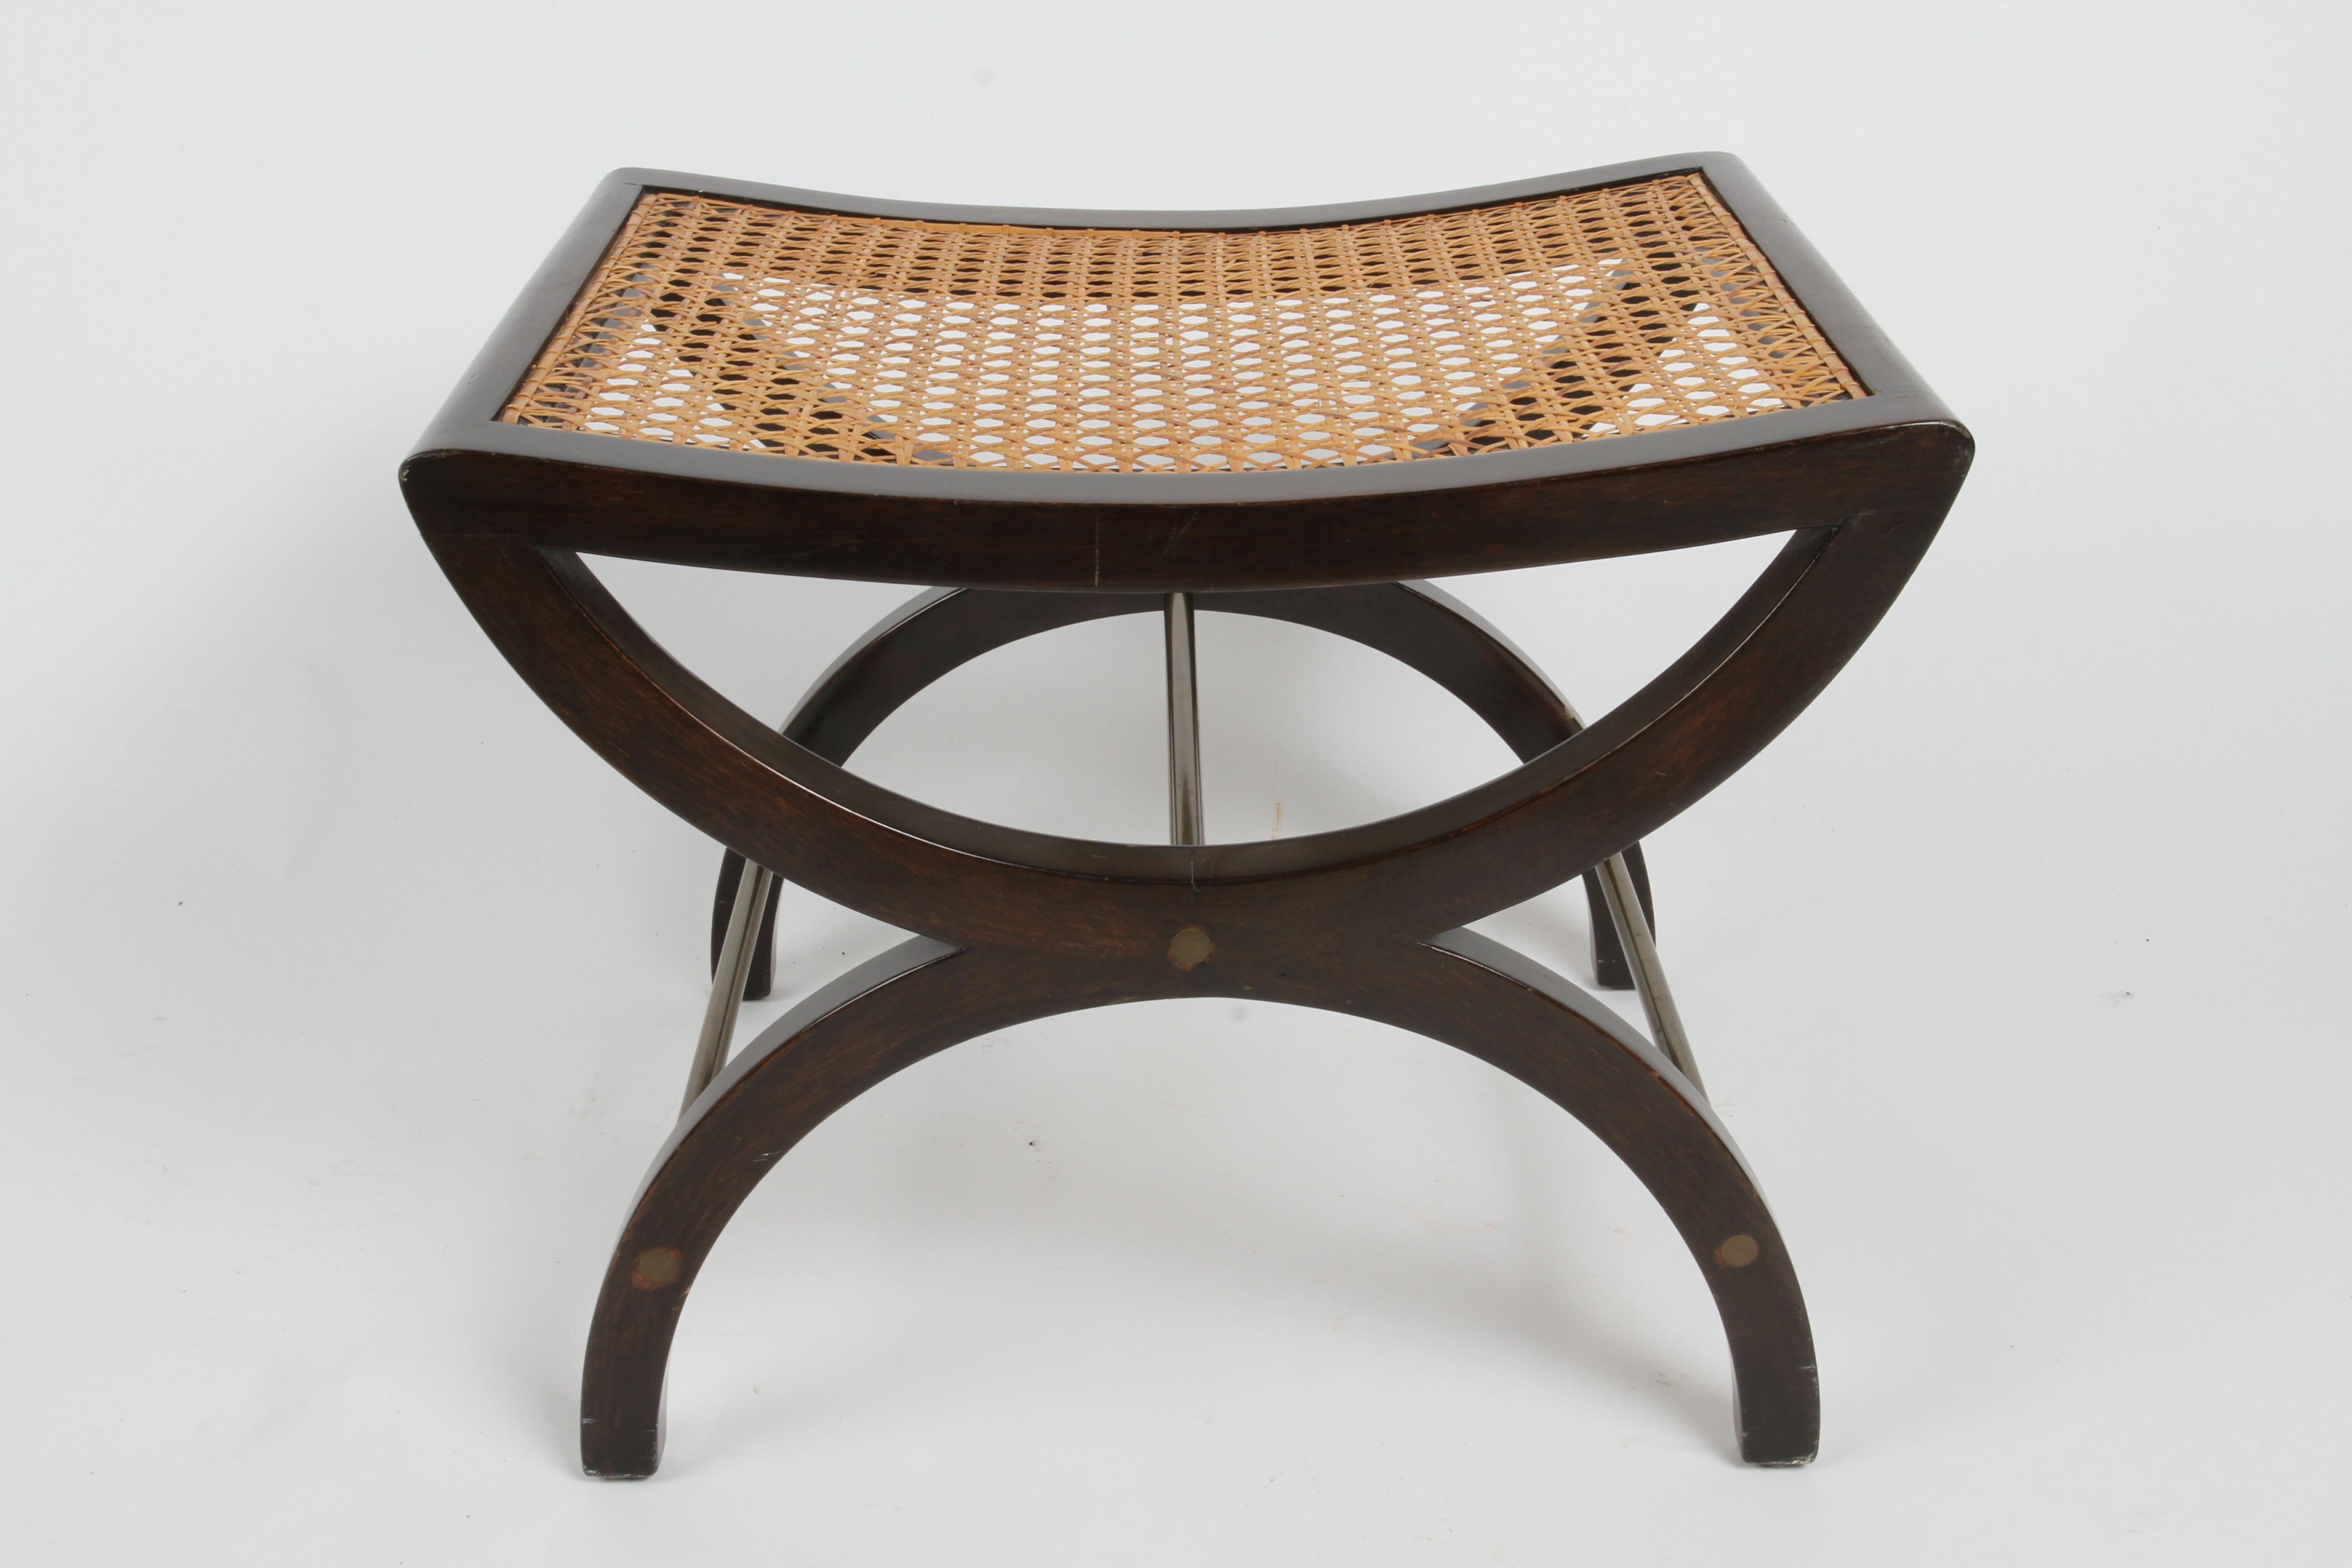 This elegant stool, bench or ottoman was designed by Edward Wormley for the Dunbar Furniture Company in 1950,  model number 5006A. This stool, based on the Ancient Roman Curule seat updated with a MCM aesthetic, has a gently concave seat with